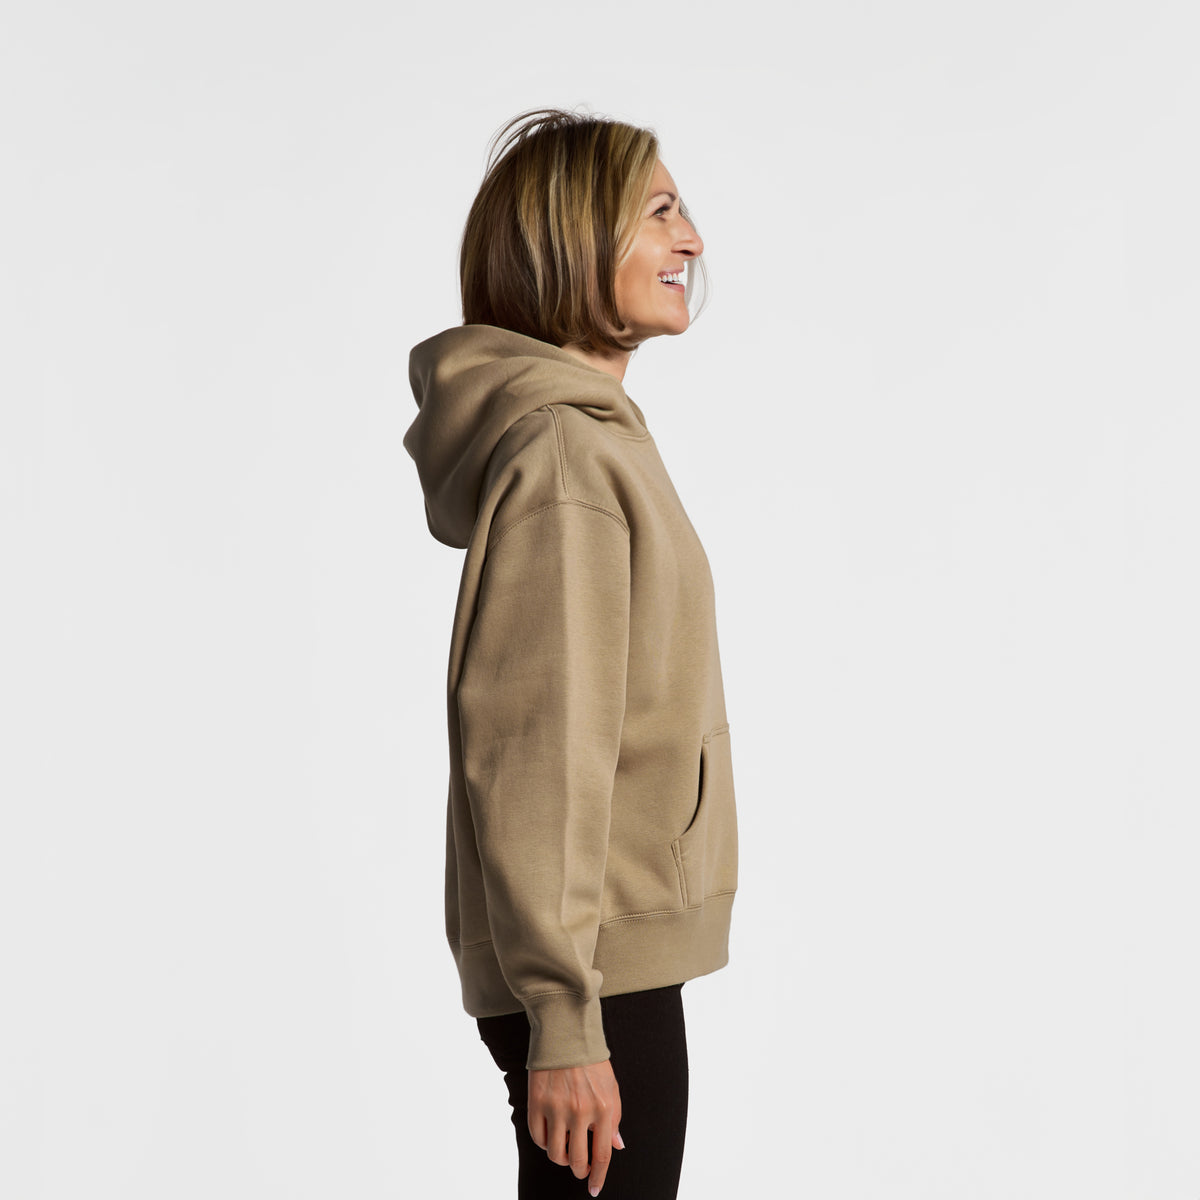 It&#39;s All Connected - Women&#39;s Heavyweight Relaxed Hoodie